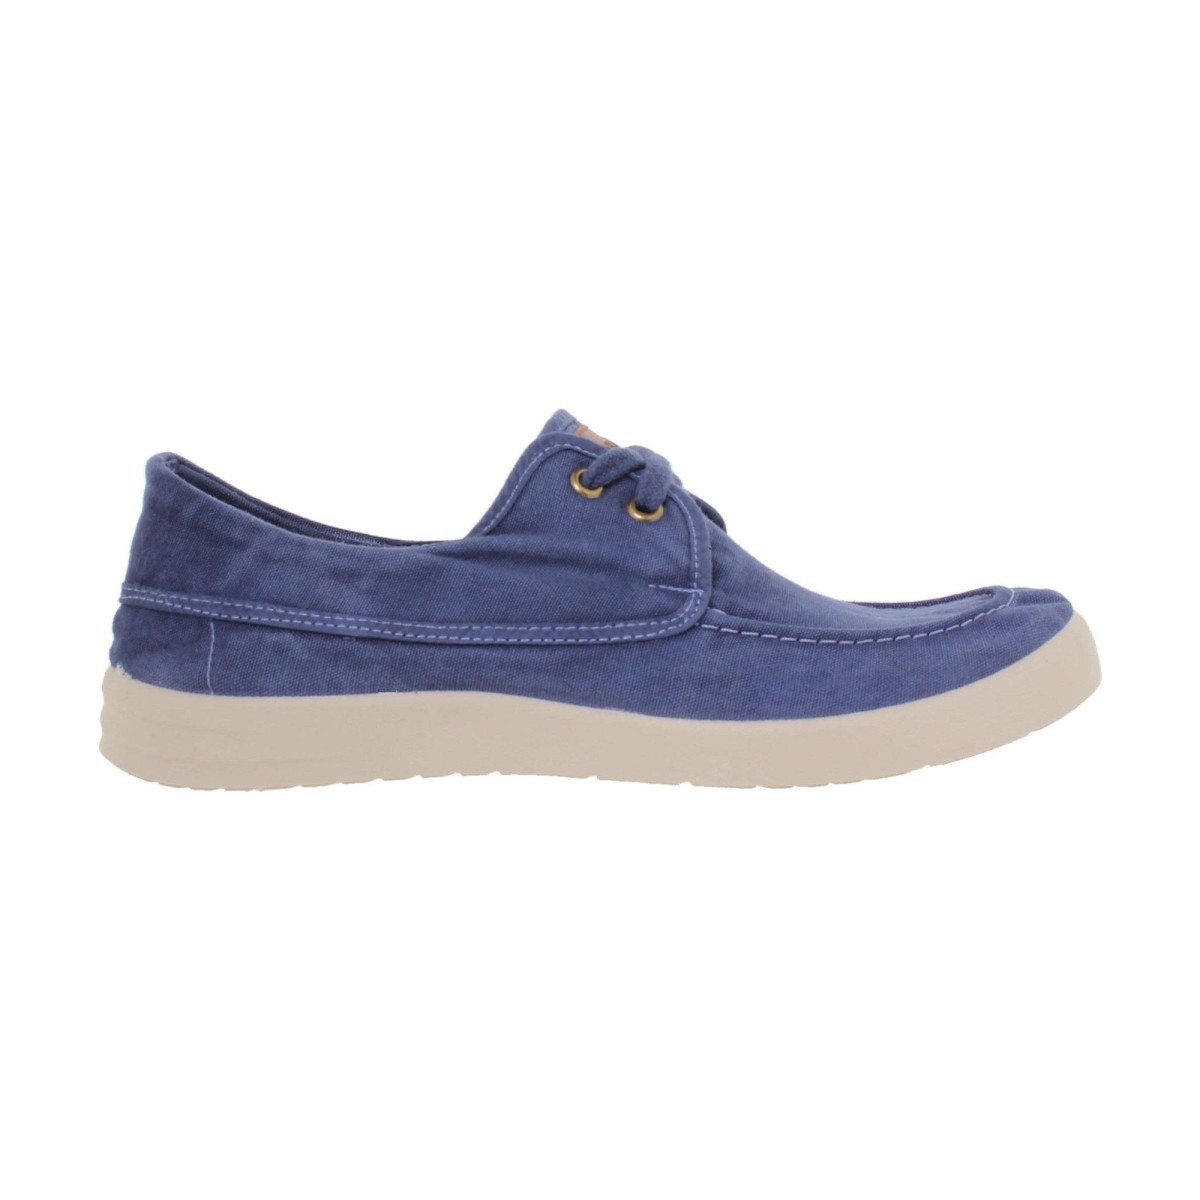 Men's Canvas Sneakers by Casual